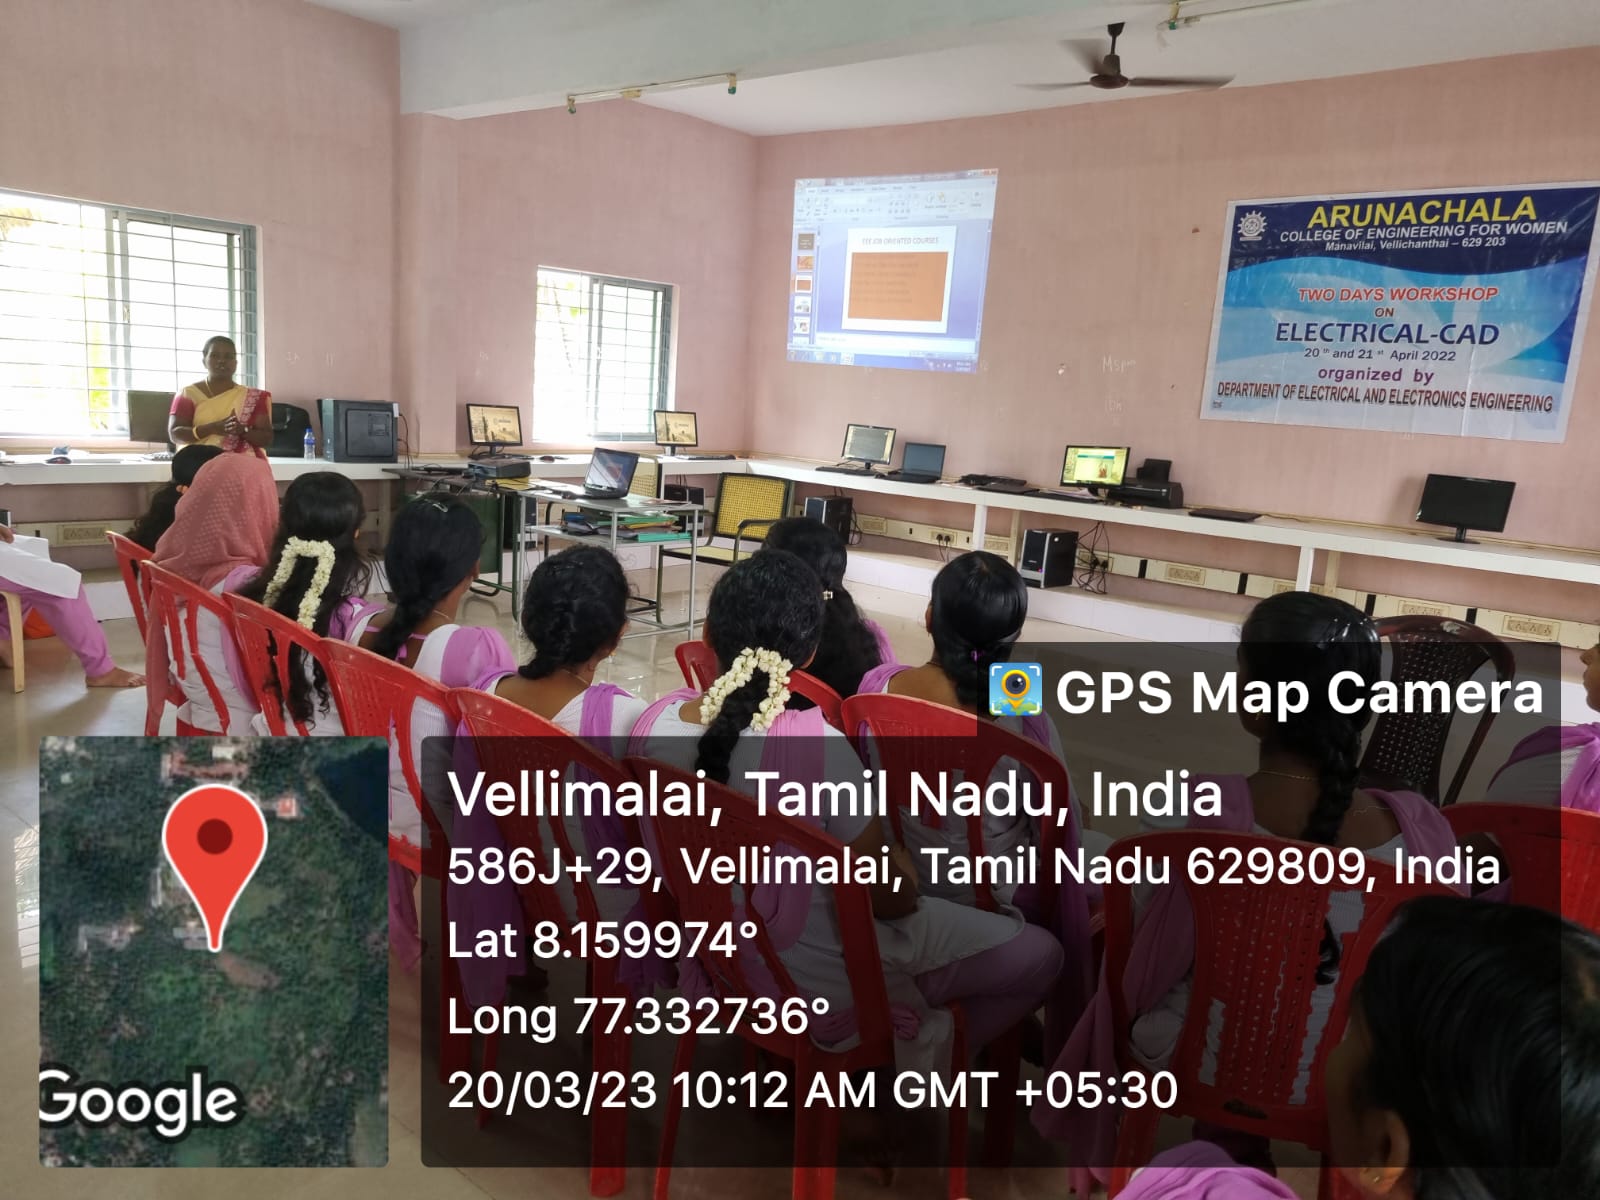 Department of EEE organizes Workshop on Electrical Wiring using ECAD by Ms. T. Kavitha, CAD Trainer, CED, Nagercoil.